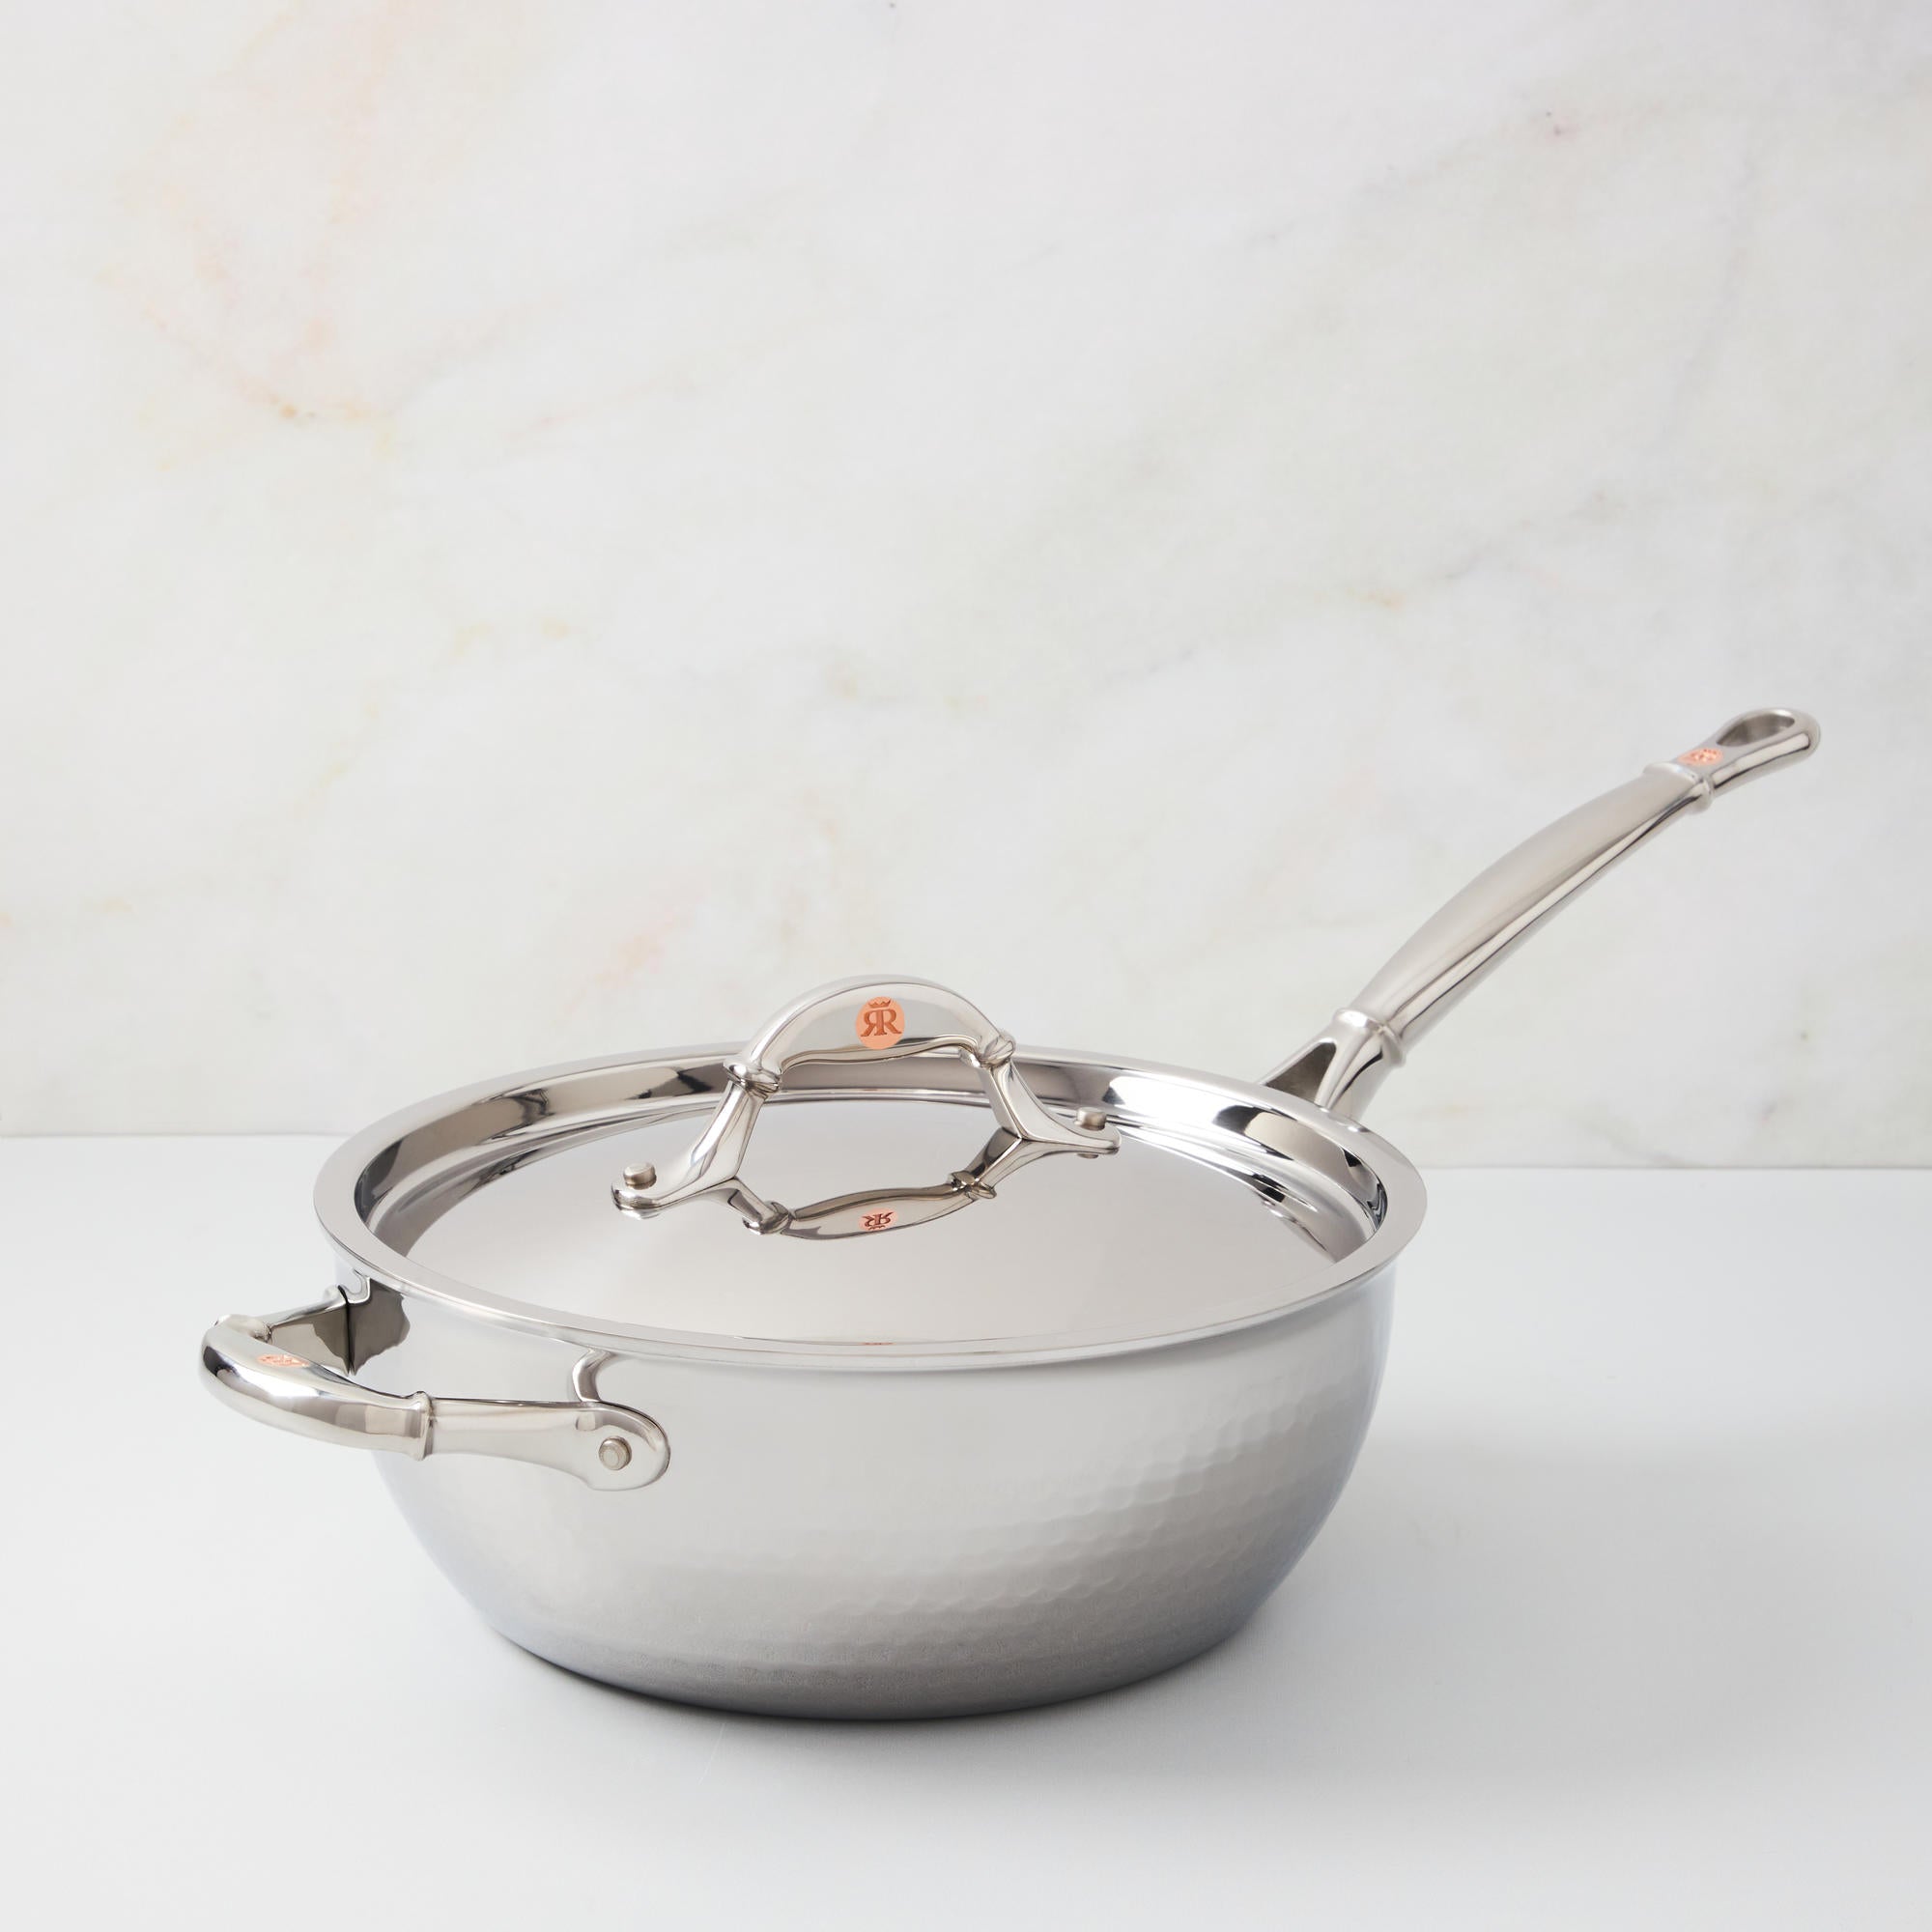 Ruffoni Symphonia Prima Chef Pan, hand hammered clad stainless steel ...